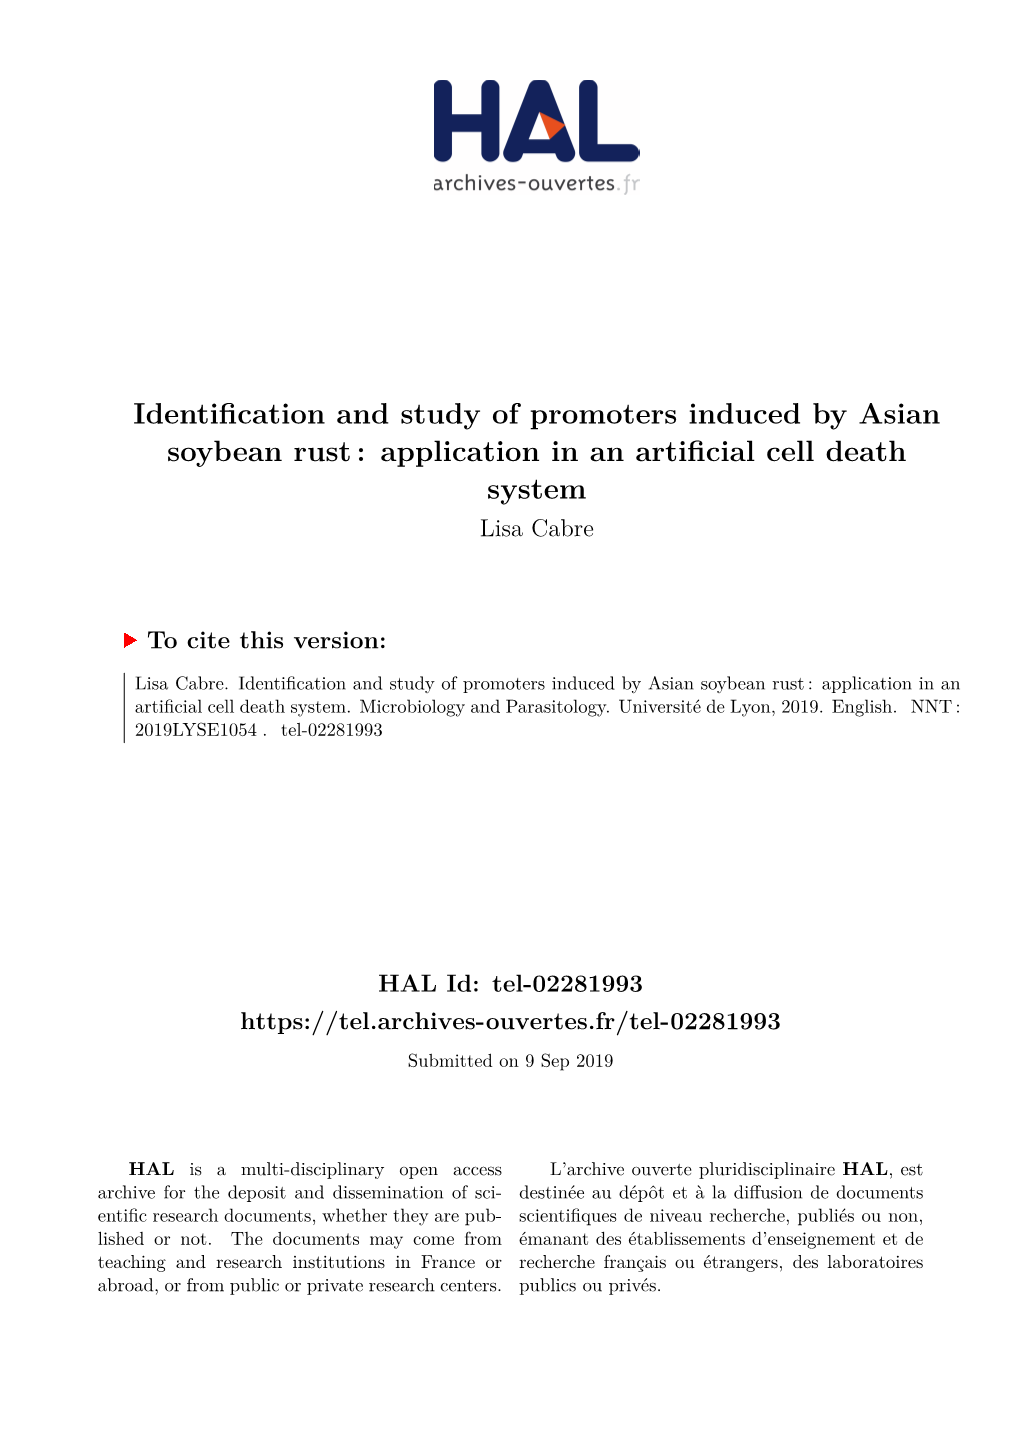 Identification and Study of Promoters Induced by Asian Soybean Rust : Application in an Artificial Cell Death System Lisa Cabre